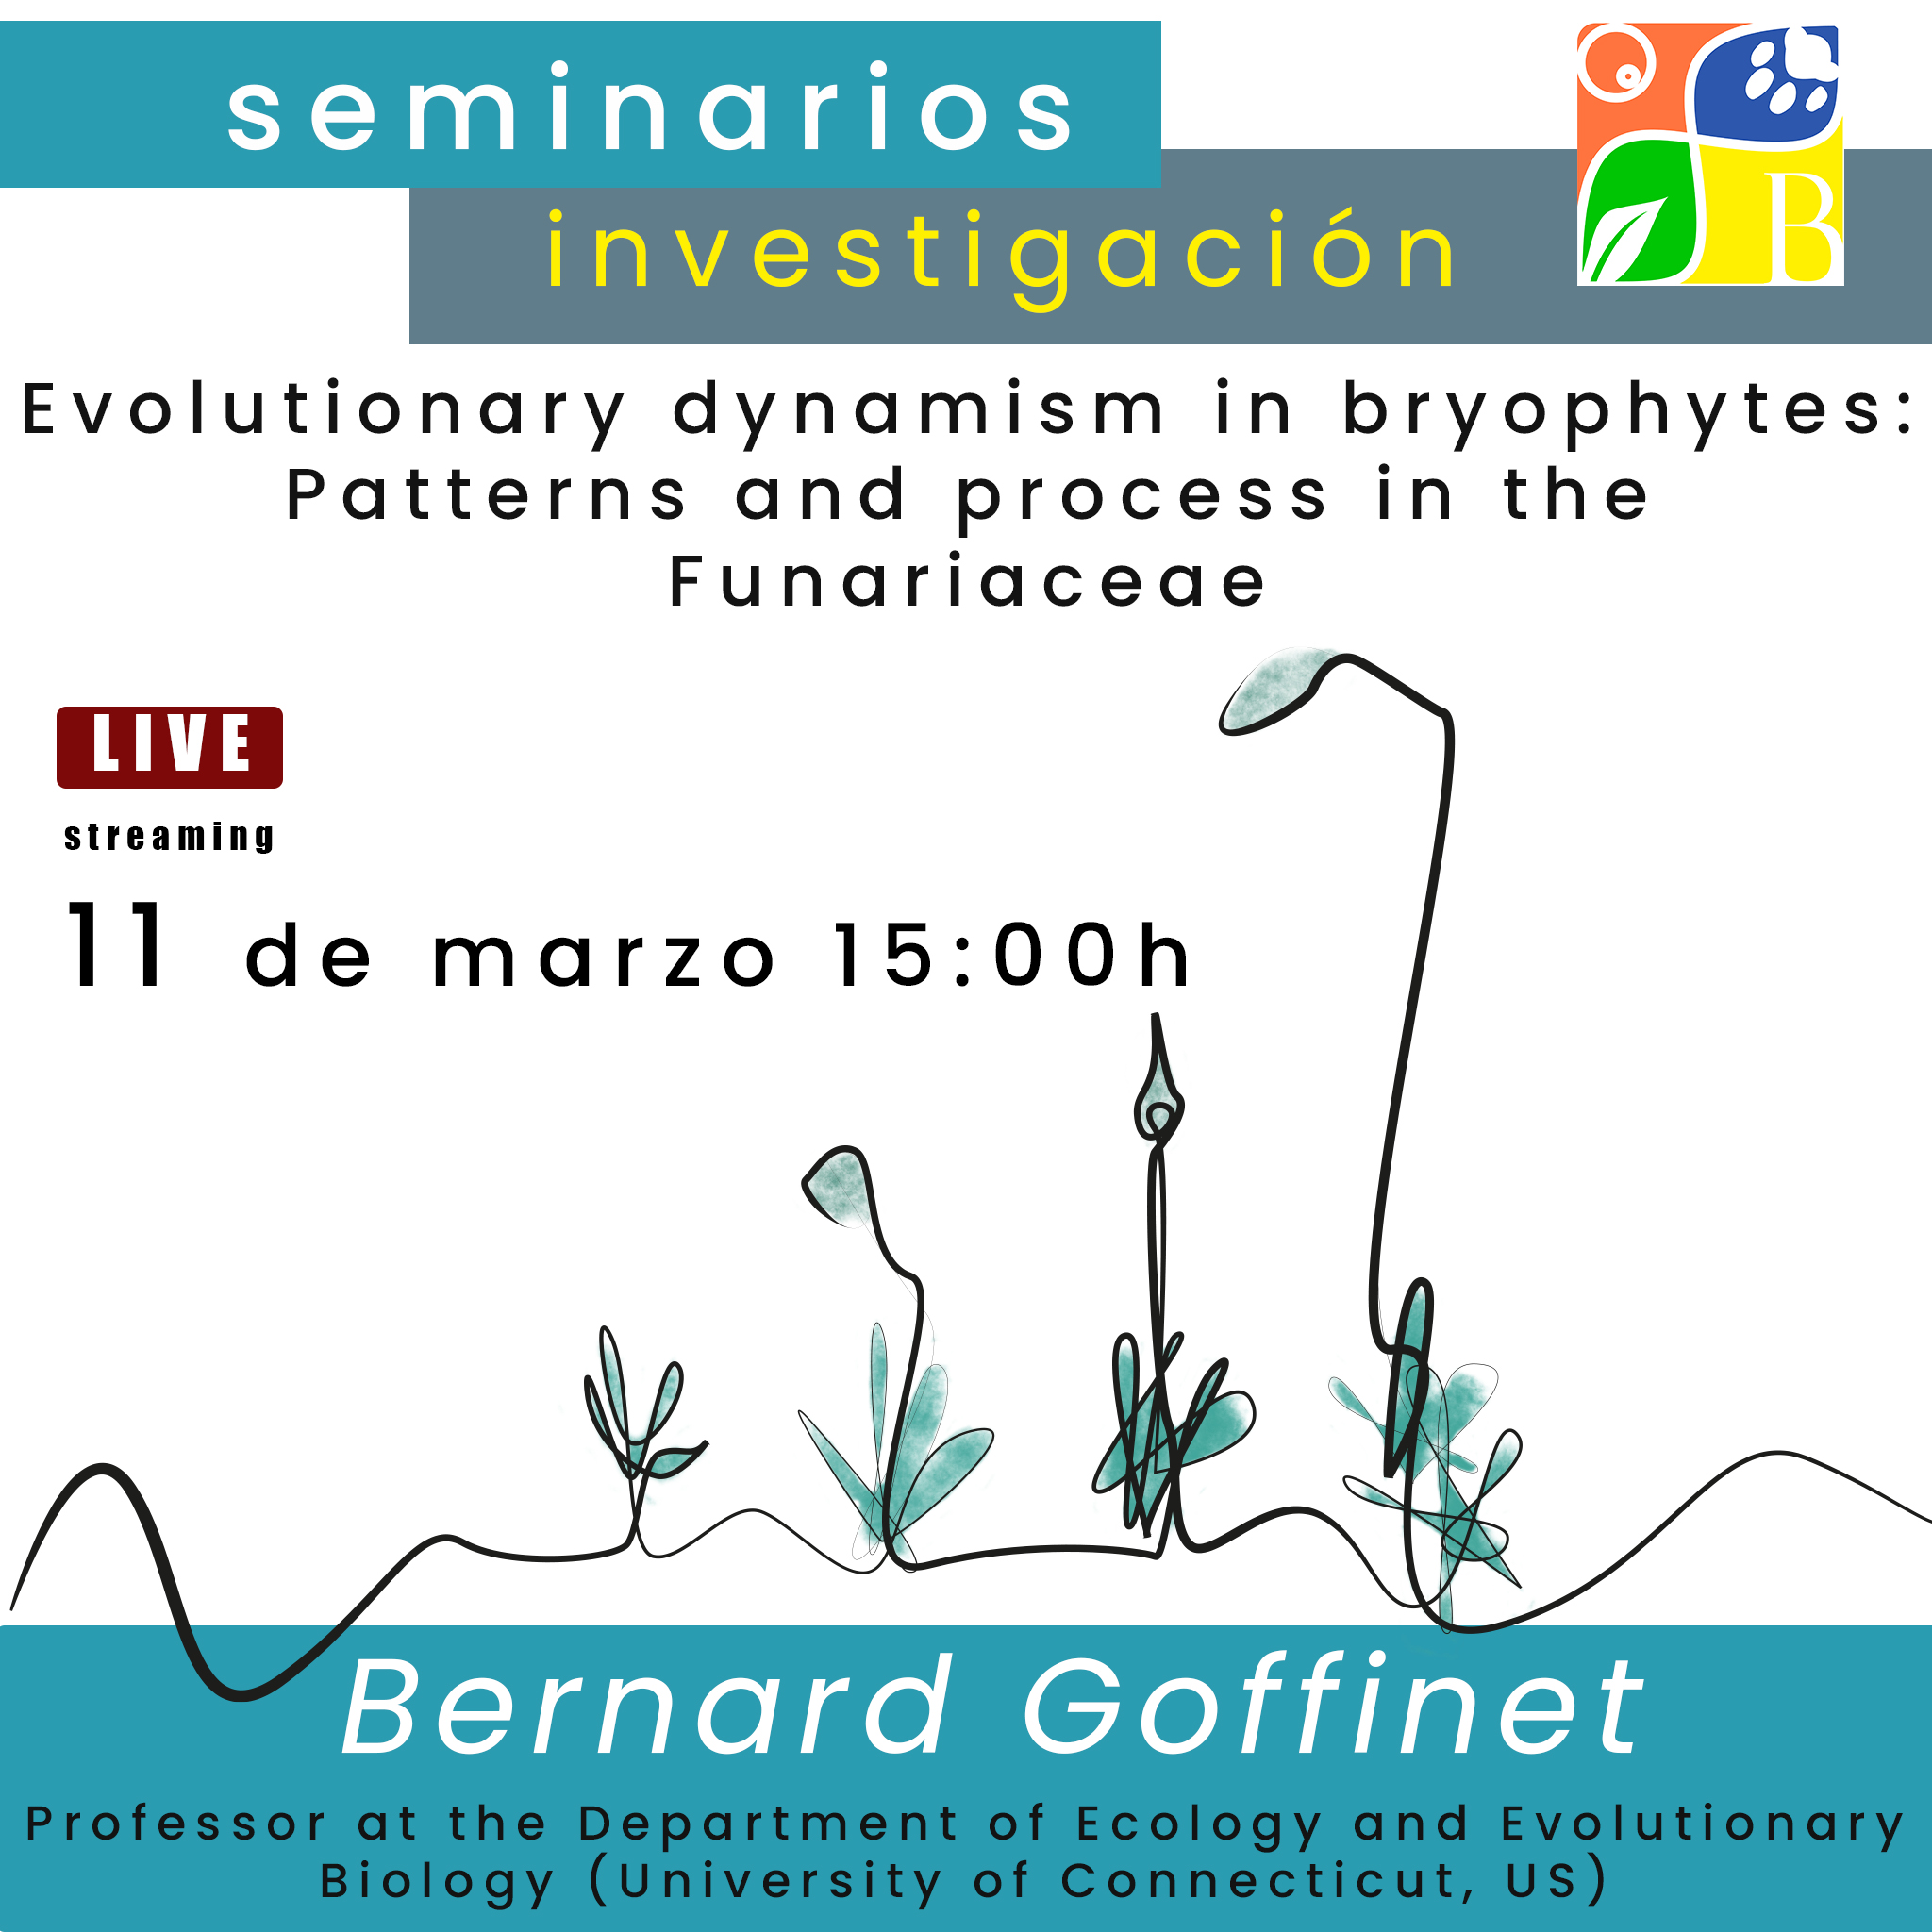 Conferencia «Evolutionary dynamism in bryophytes: Patterns and process in the Funariaceae» 11 de marzo